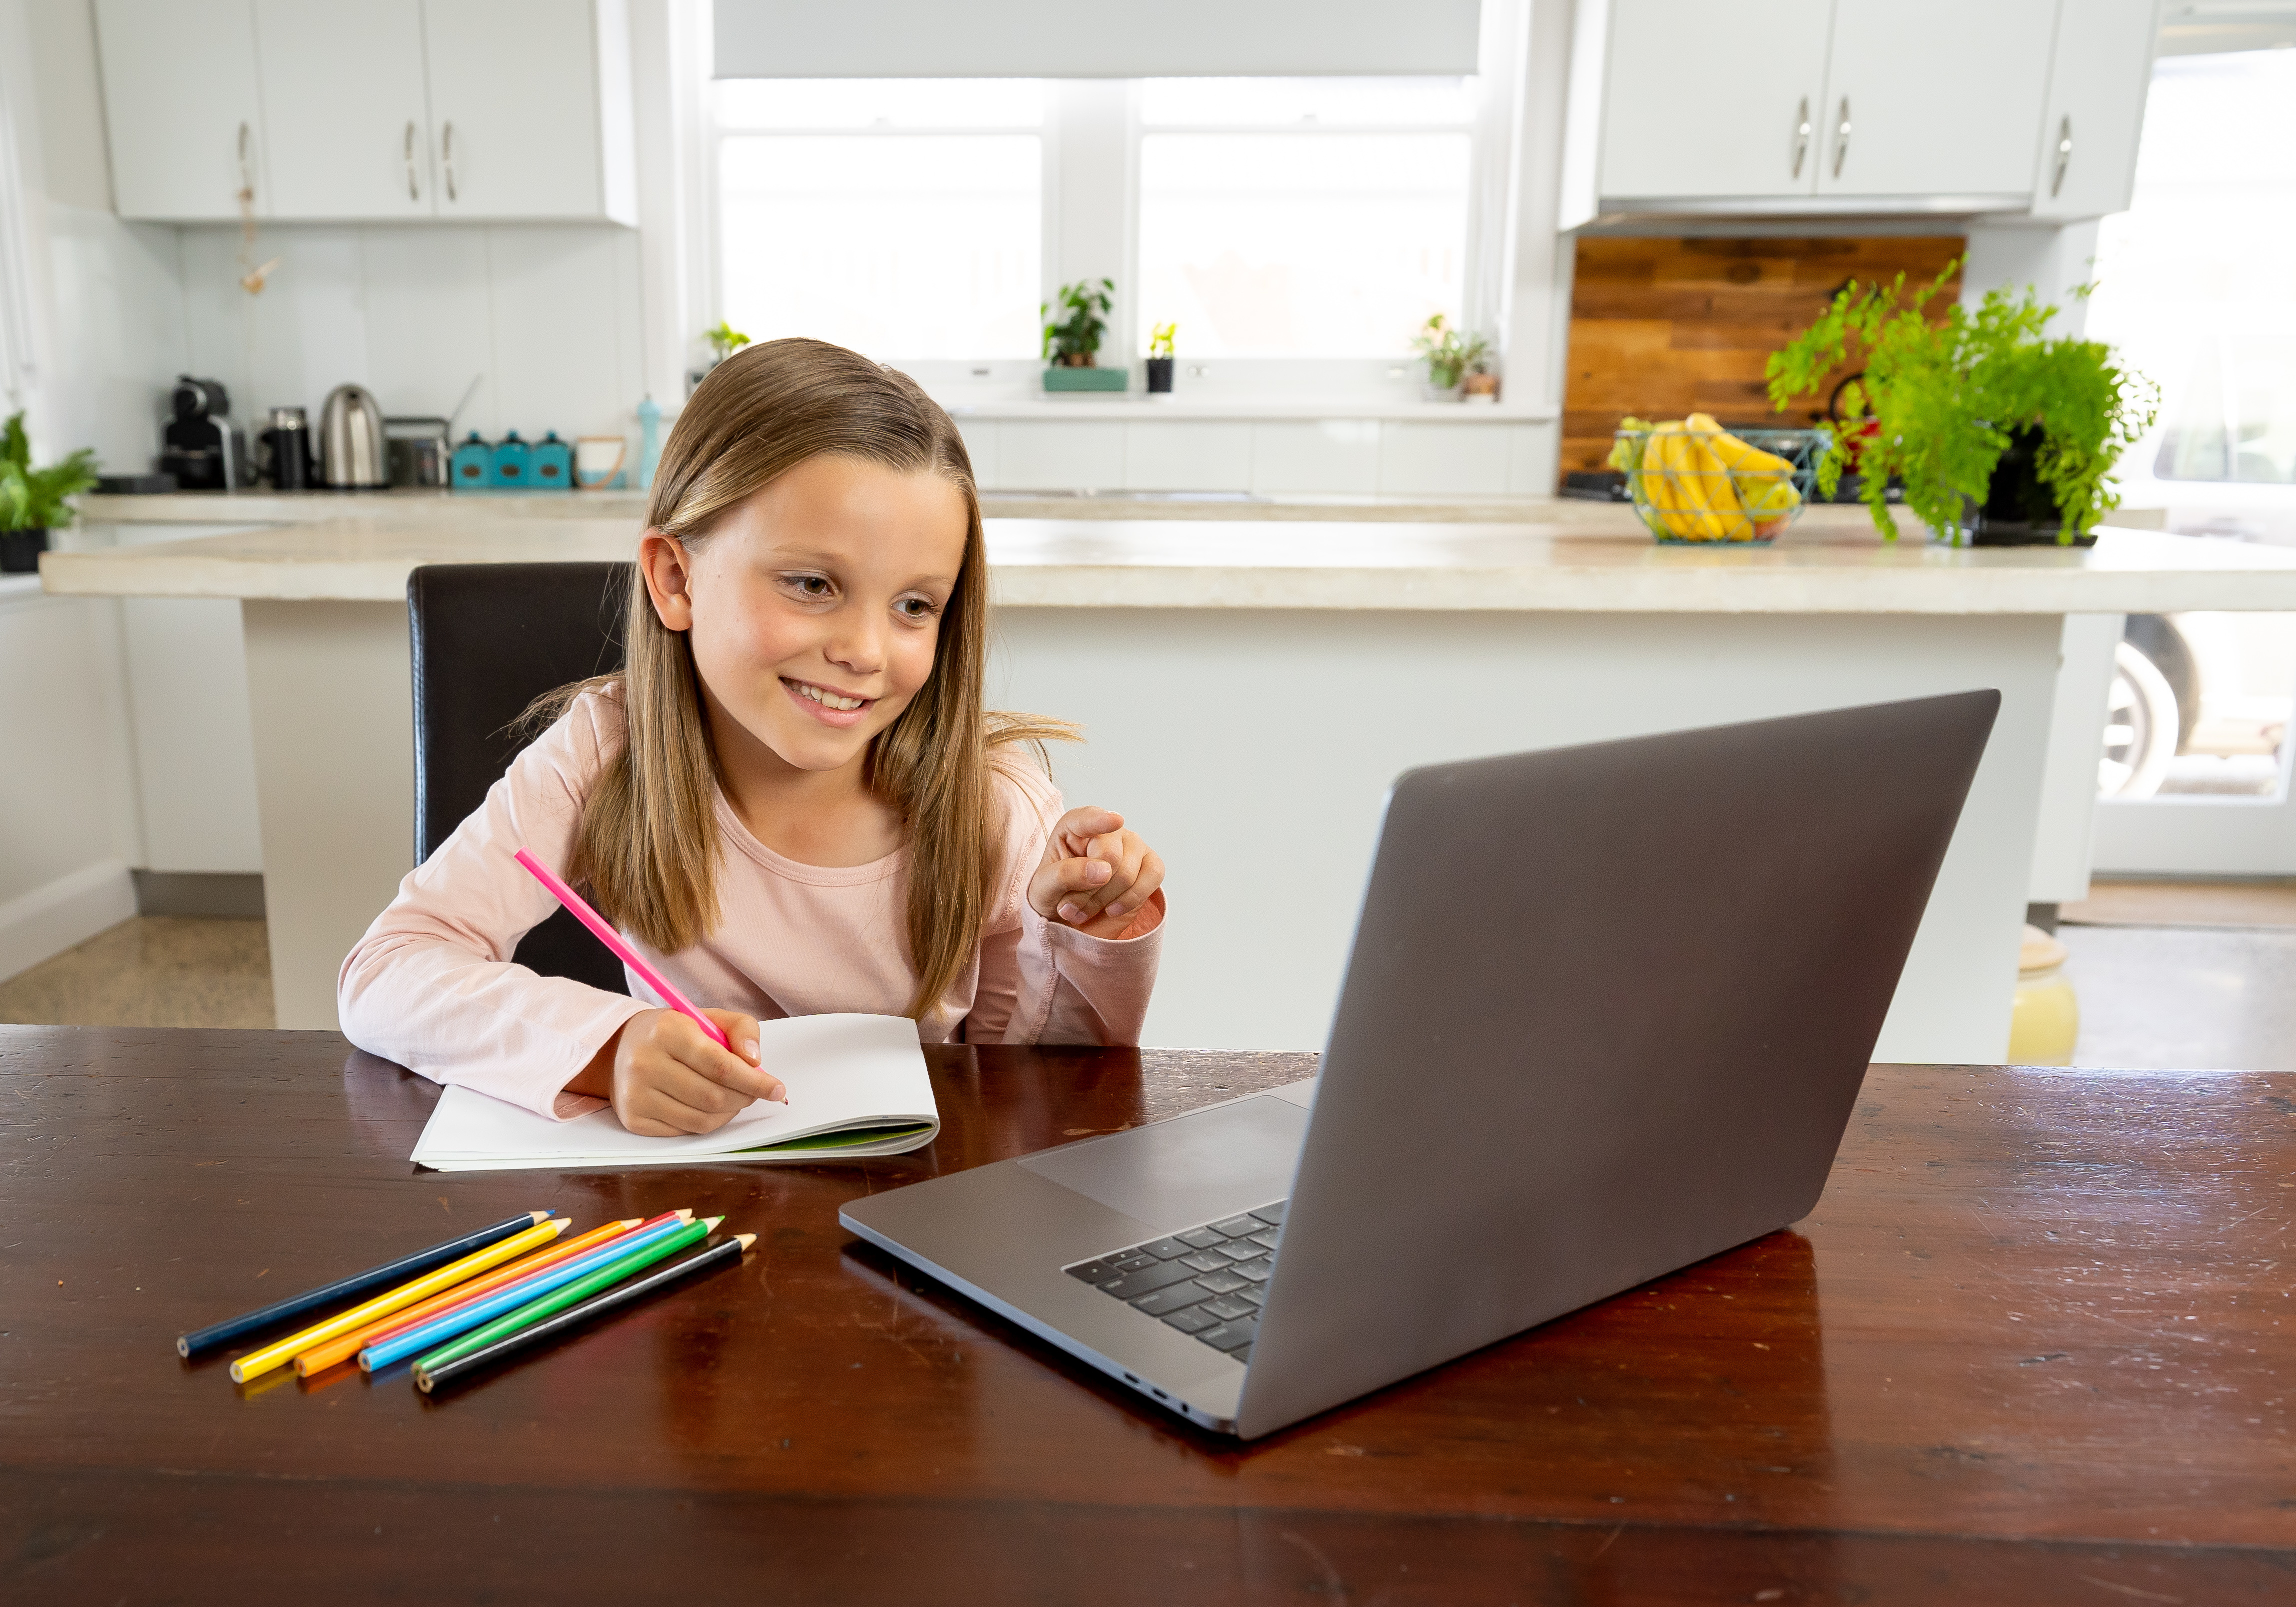 Image of a girl smiling at a laptop doing some paperwork